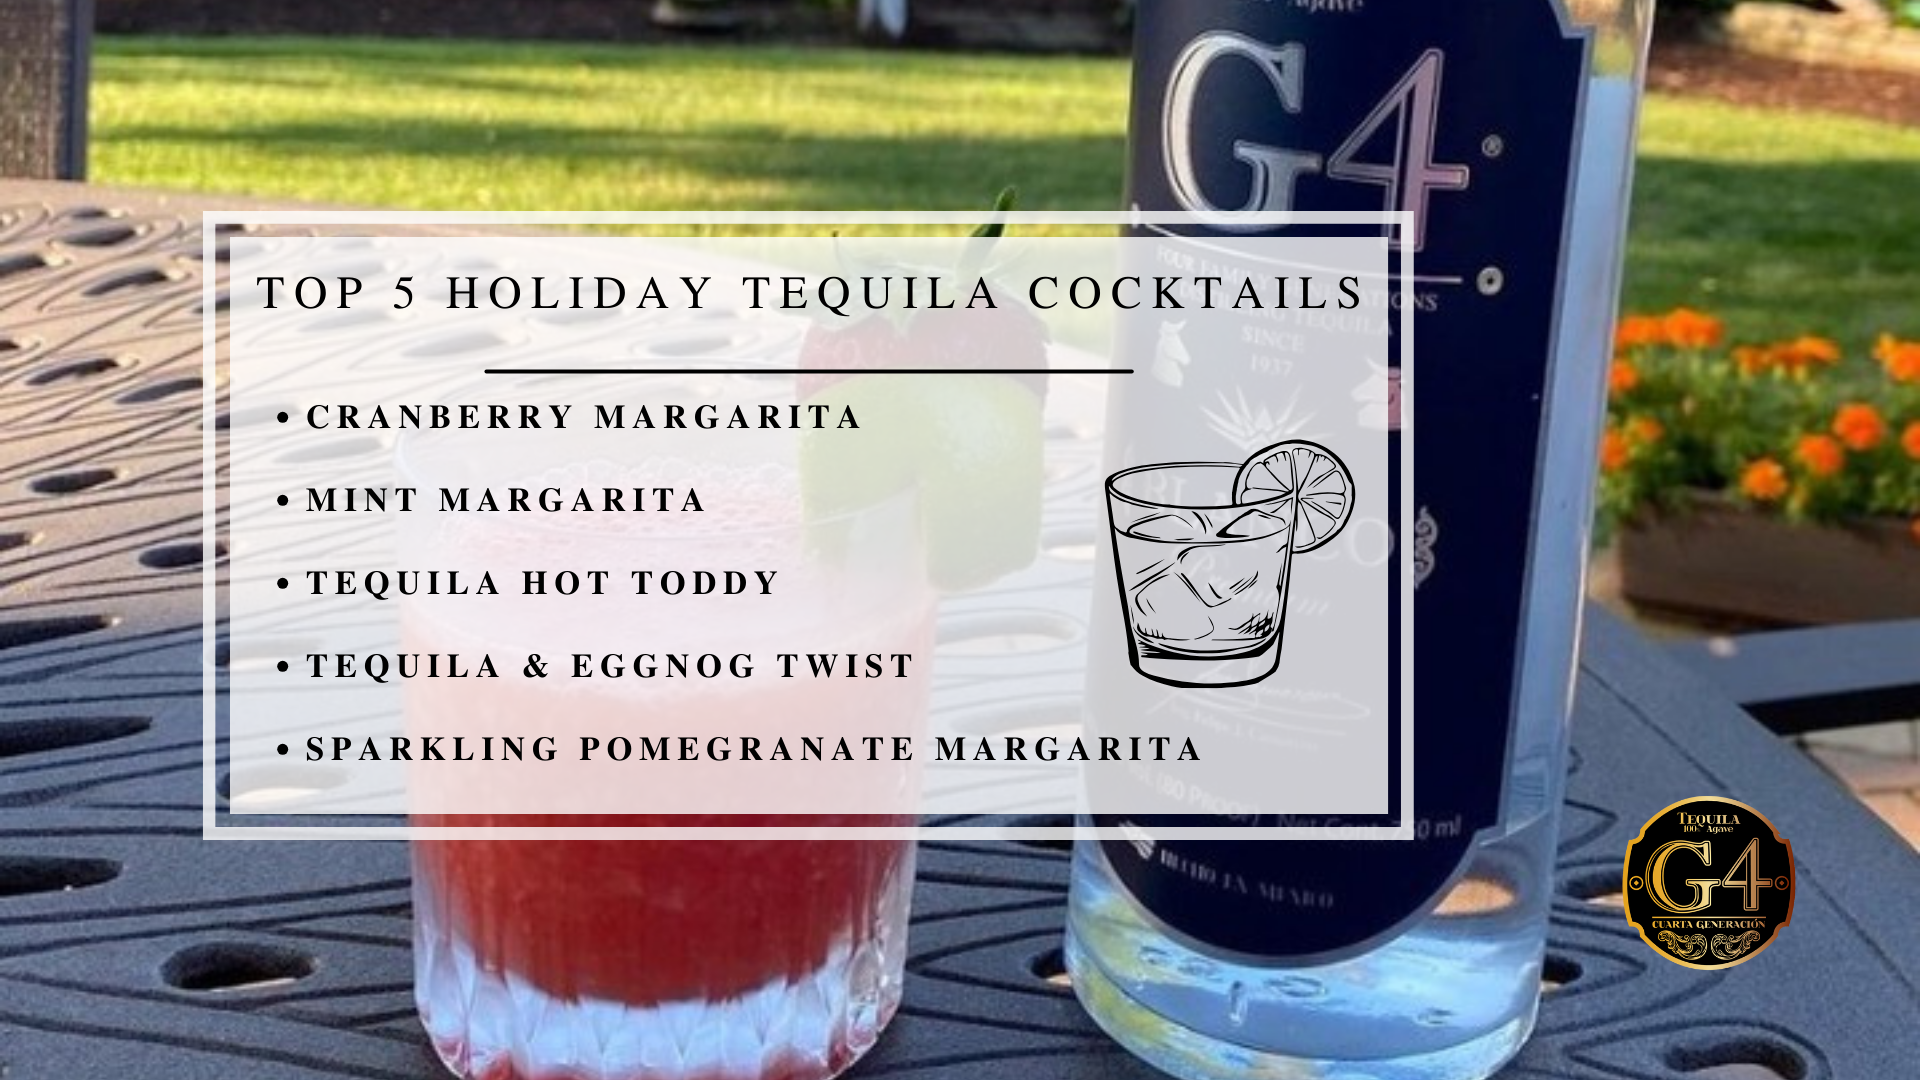 Infographic image of top 5 holiday tequila cocktails